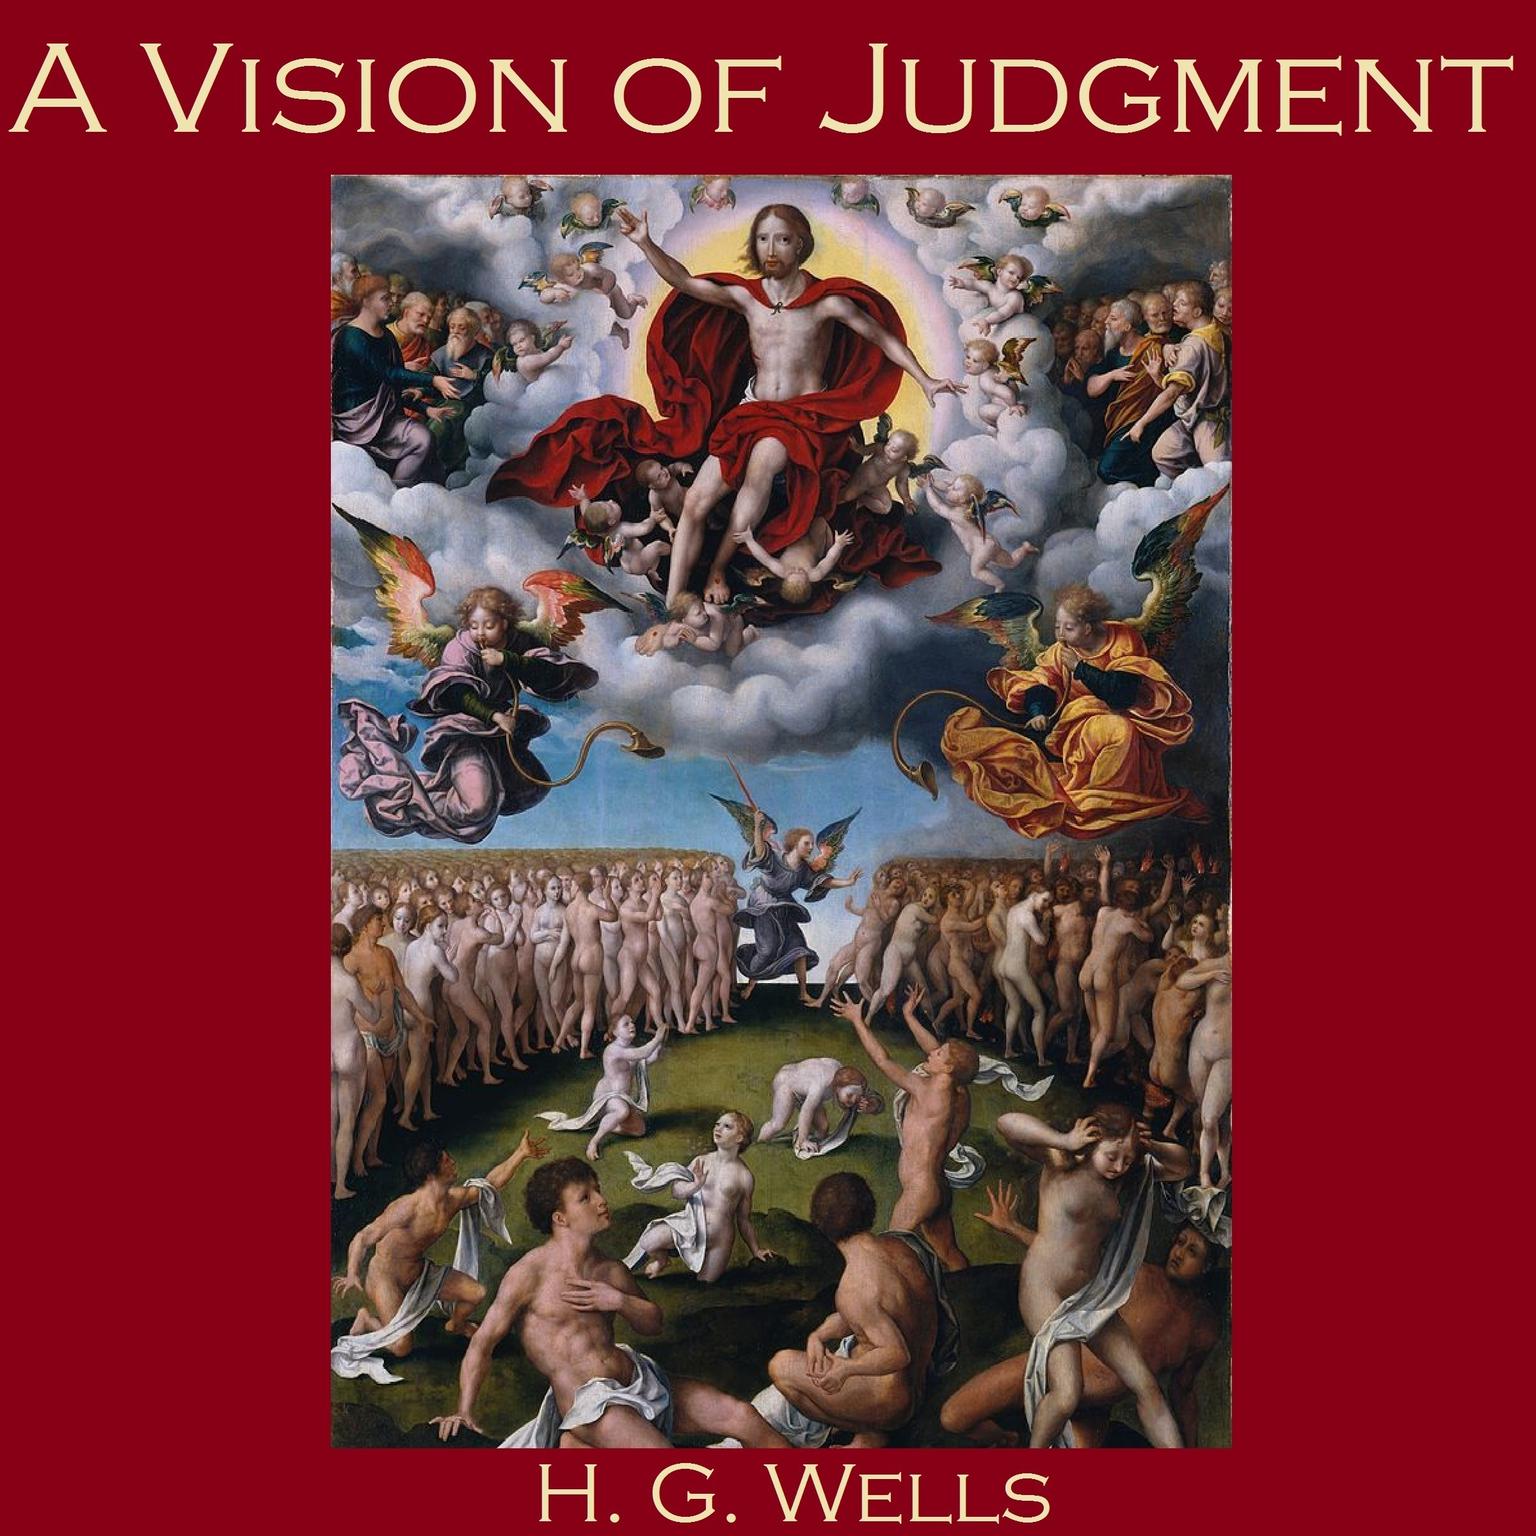 A Vision of Judgment Audiobook, by H. G. Wells